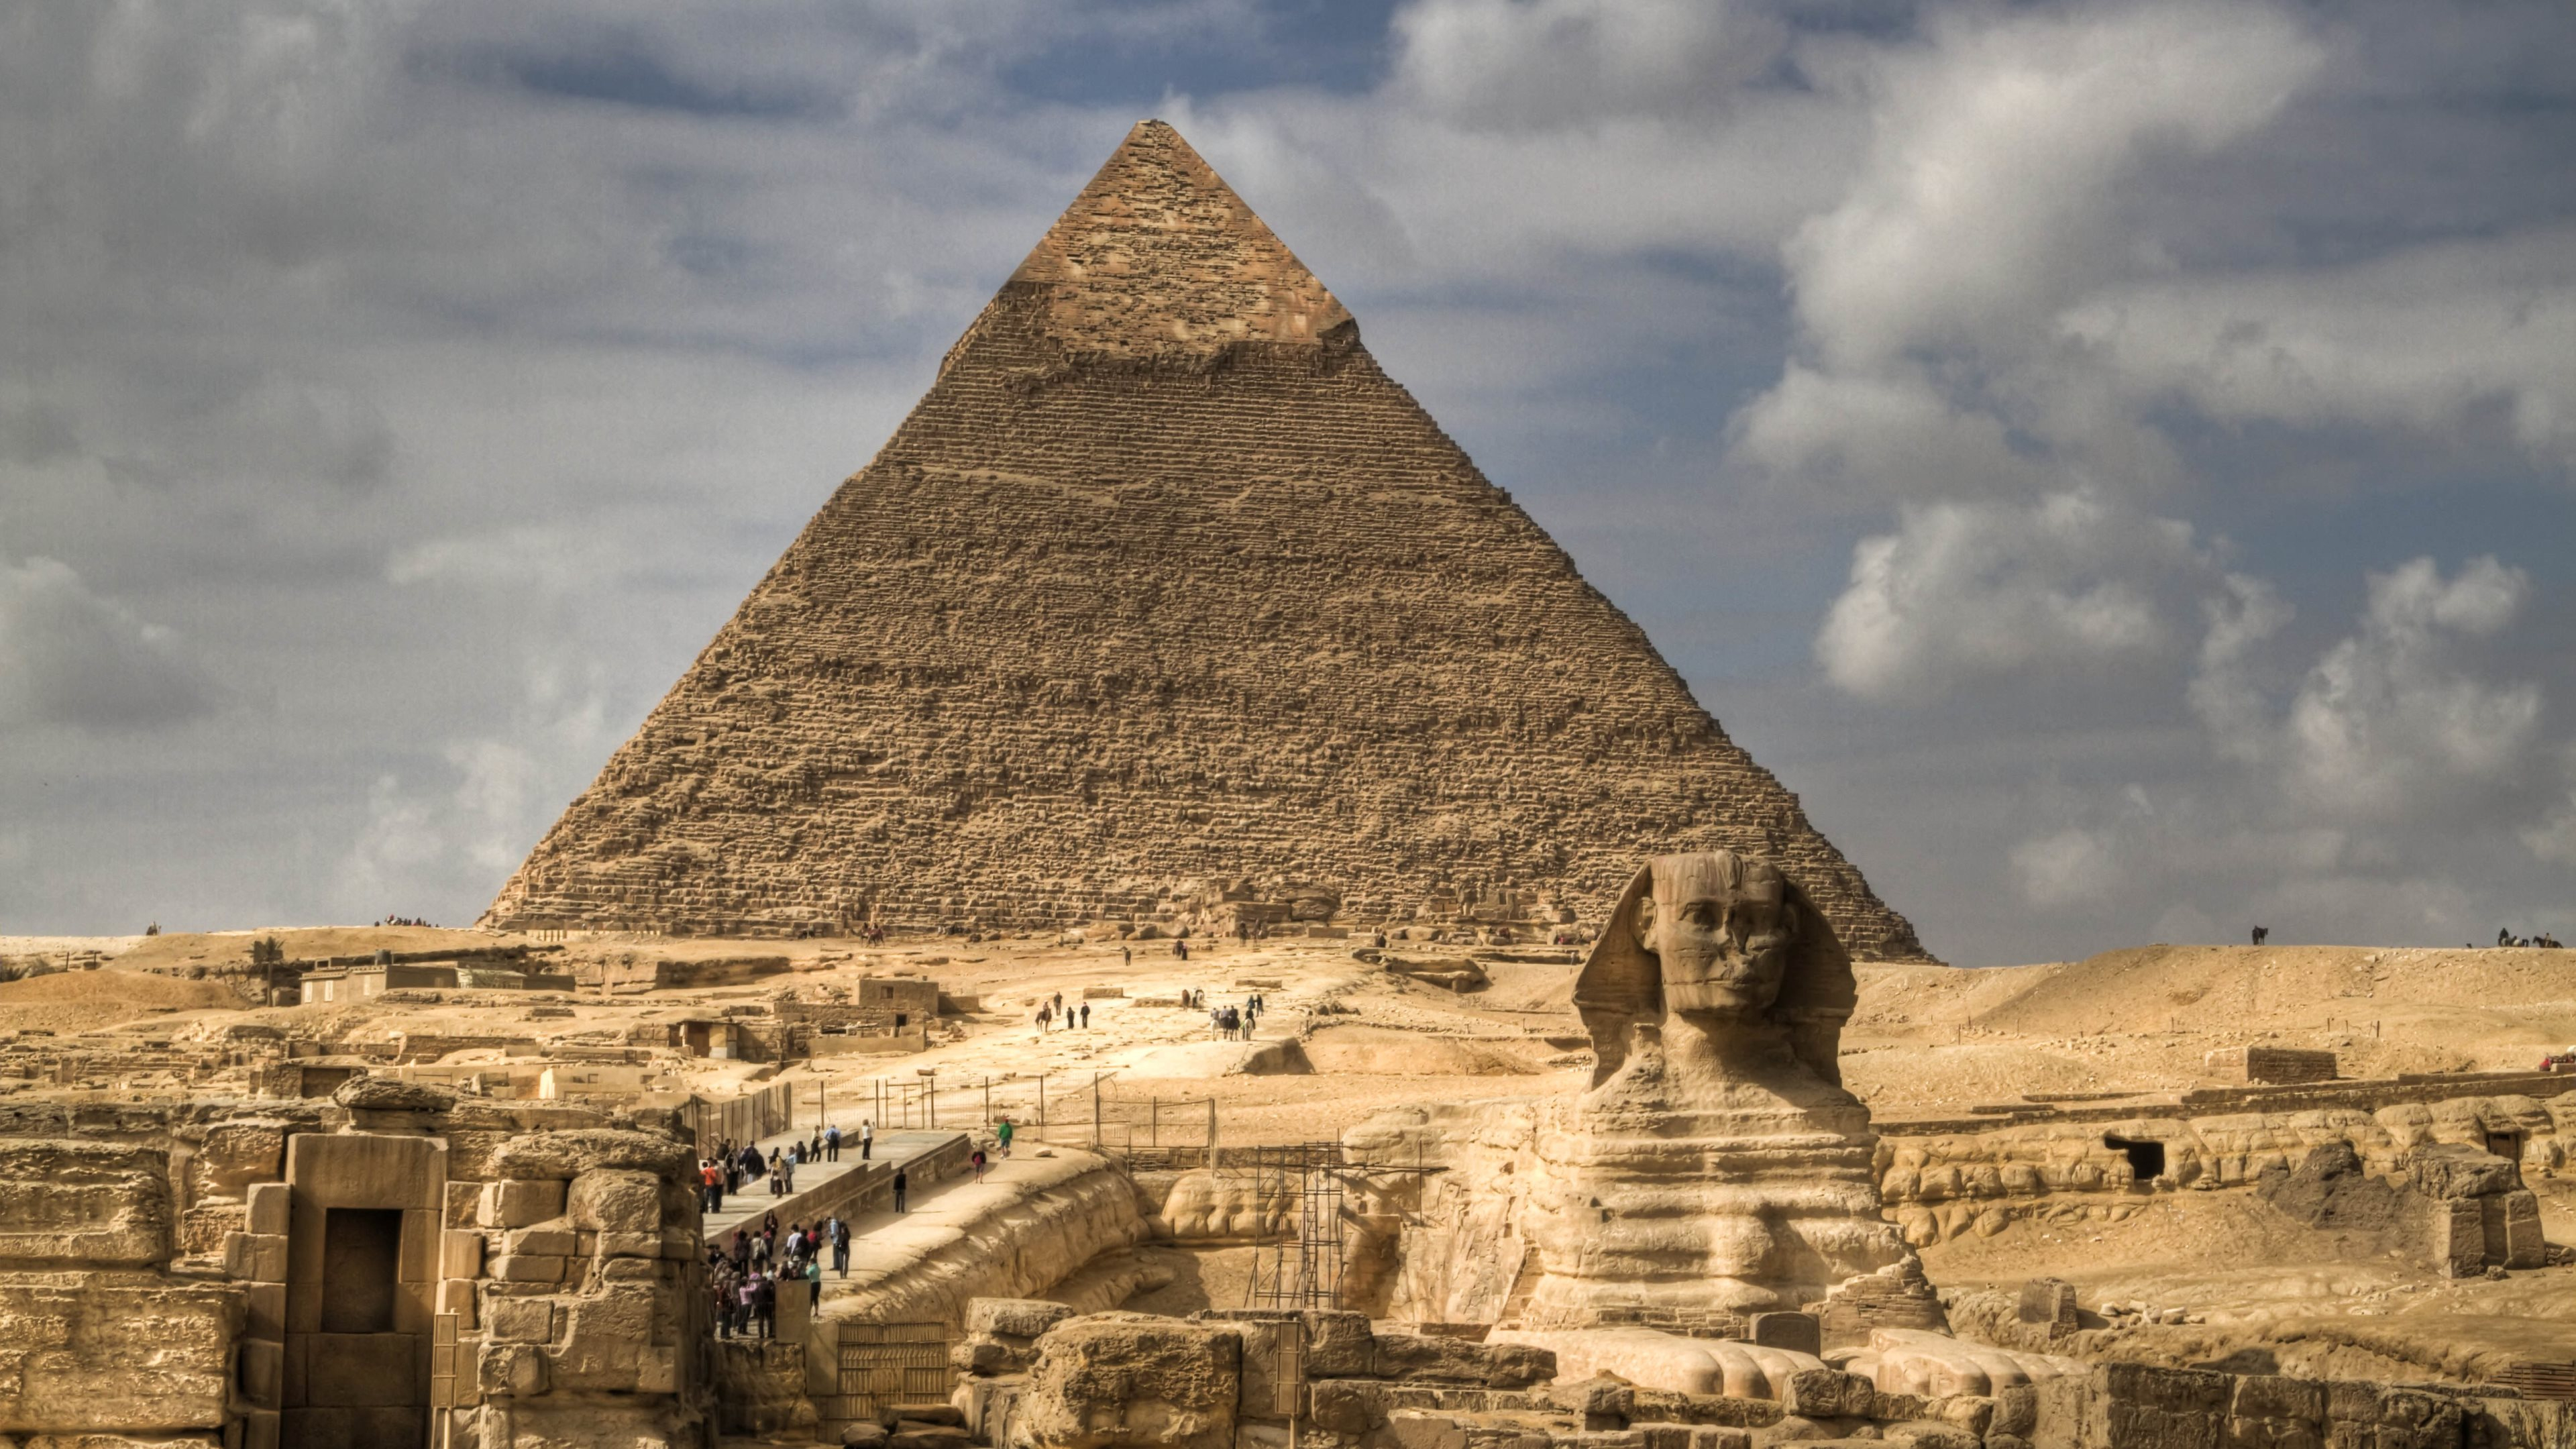 3840x2160 40+ Pyramid HD Wallpapers and Backgrounds